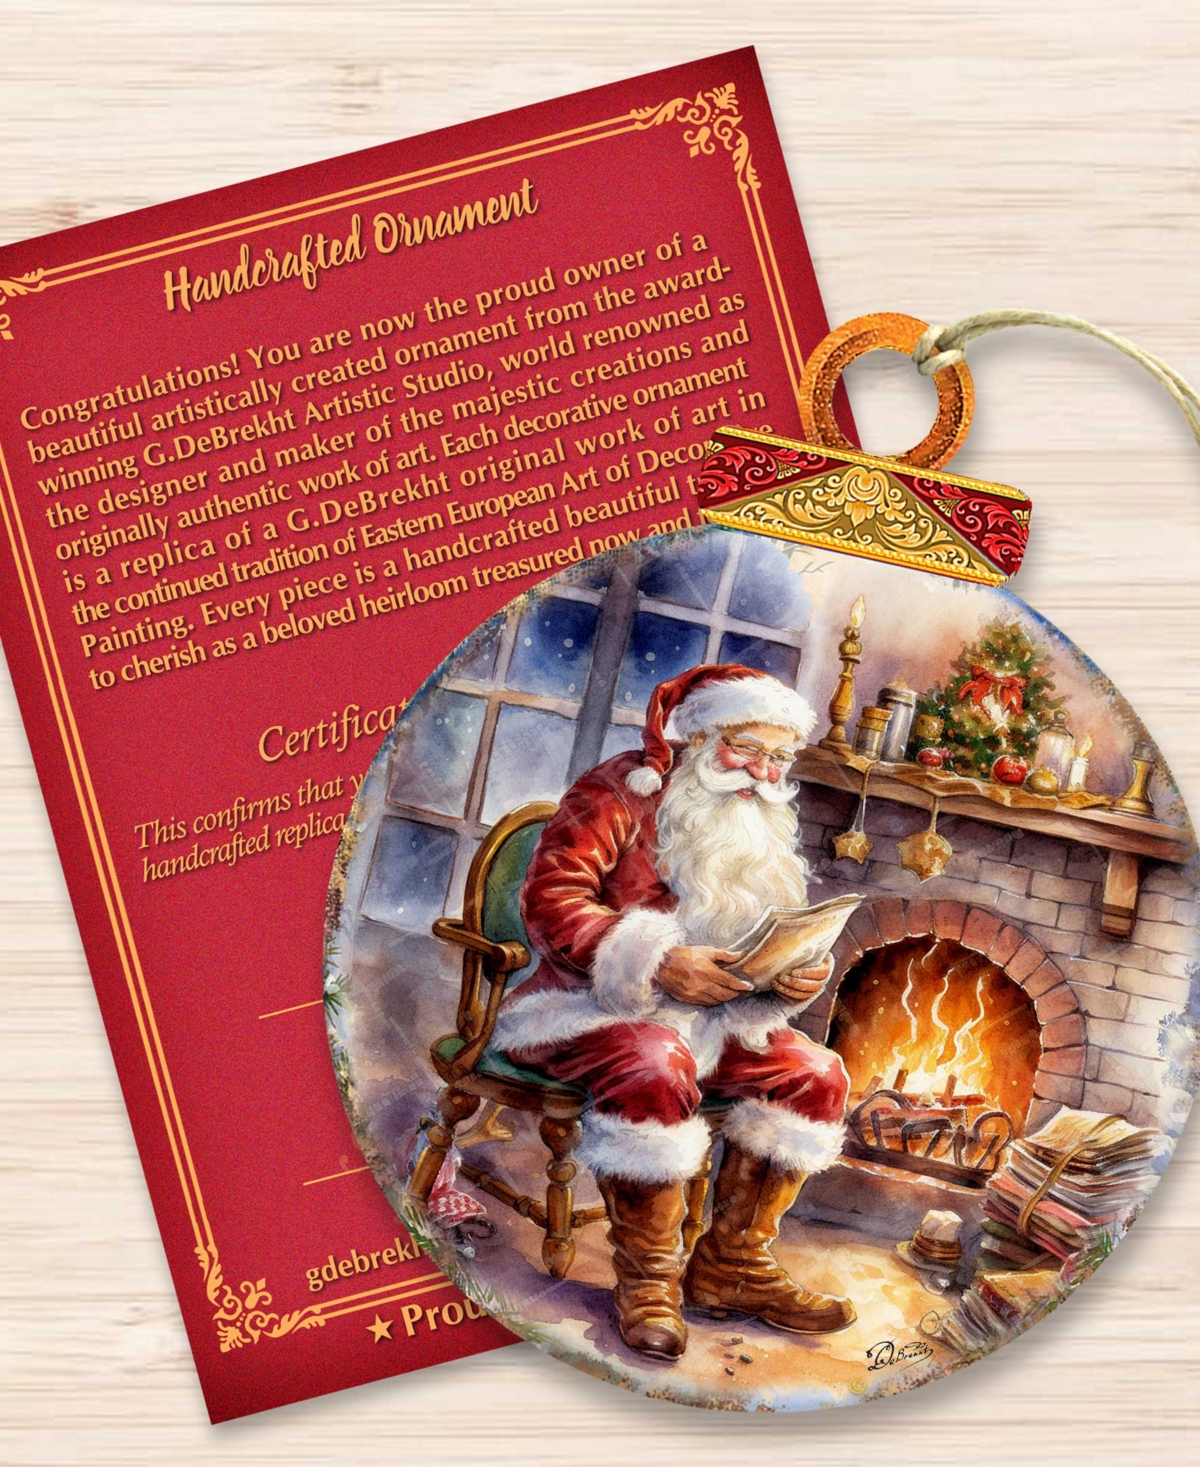 Shop Designocracy Santa At The Fireplace Christmas Wooden Ornaments Holiday Decor G. Debrekht In Multi Color